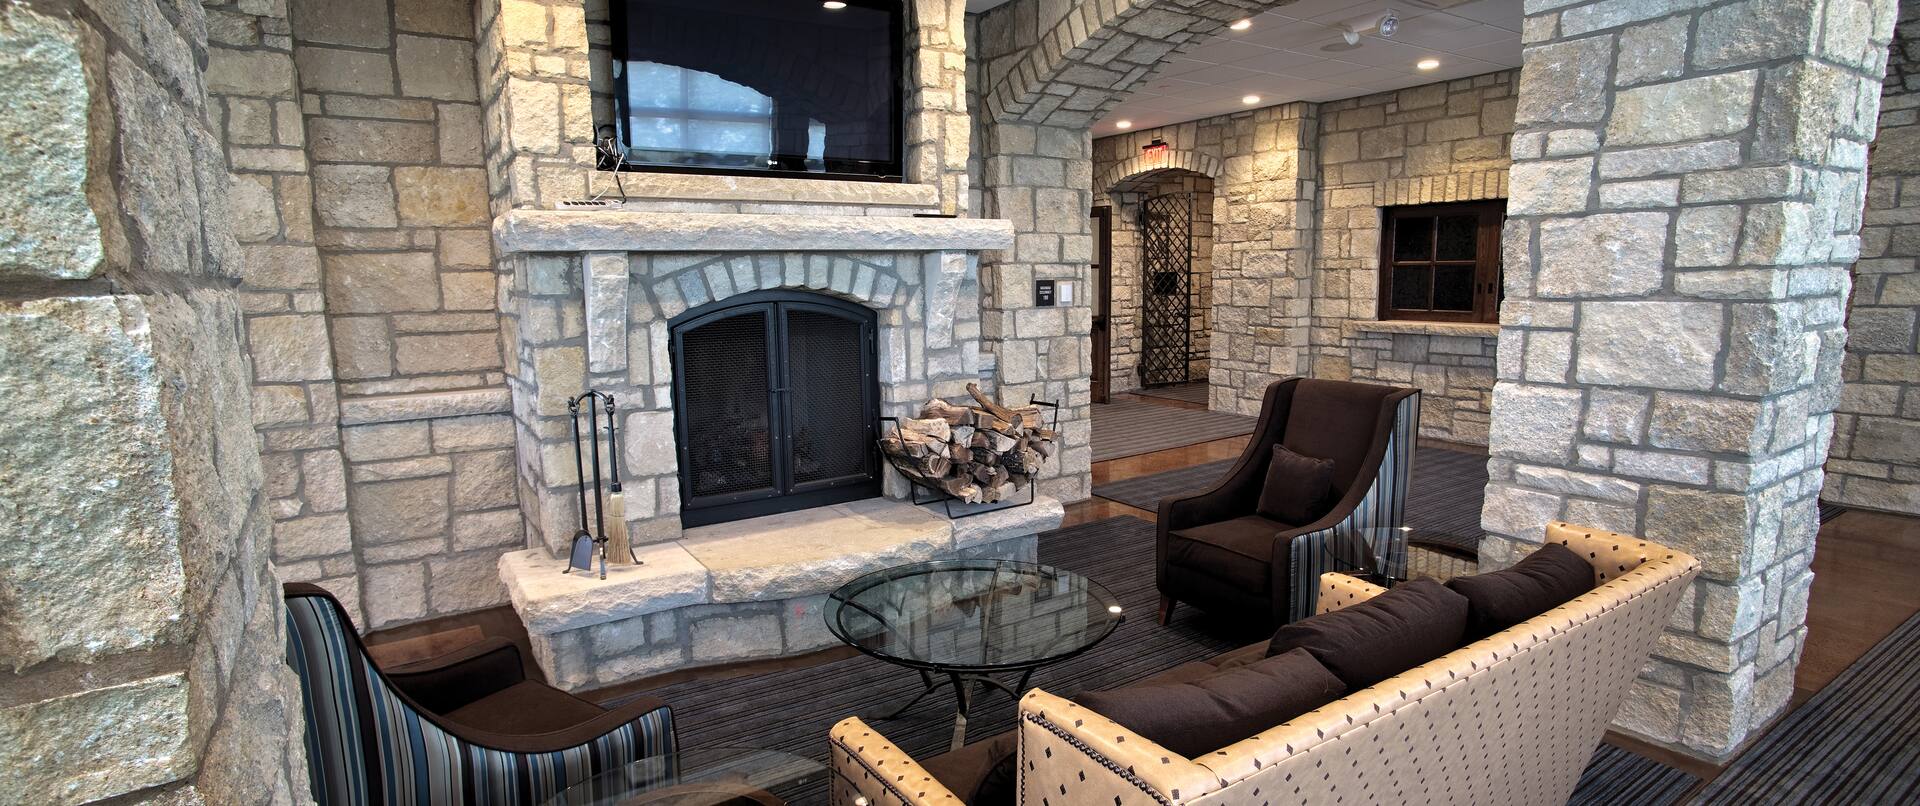 Lobby seating with fireplace and wall mounted TV